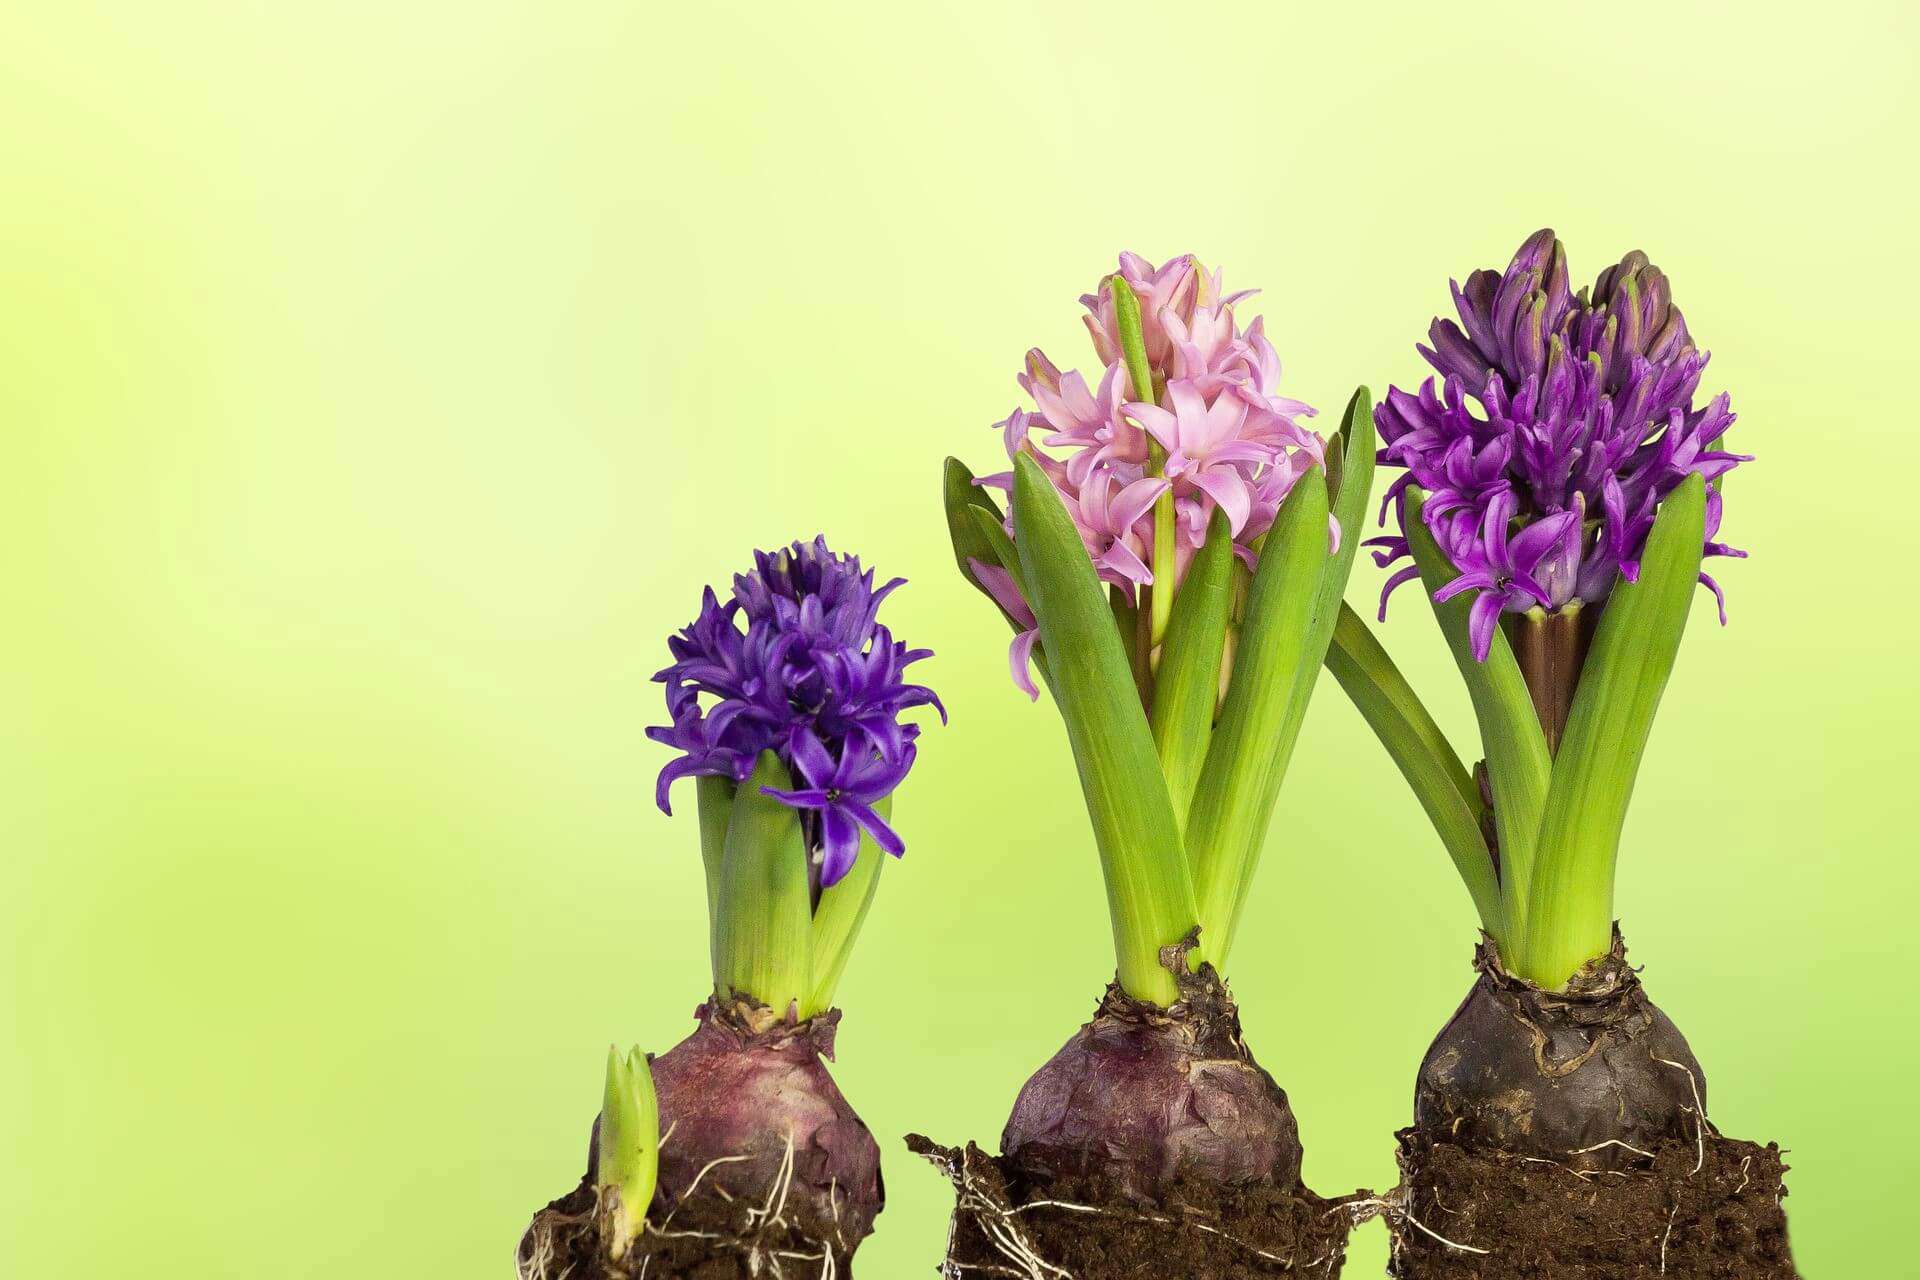 three bulb plants lined up against a green background